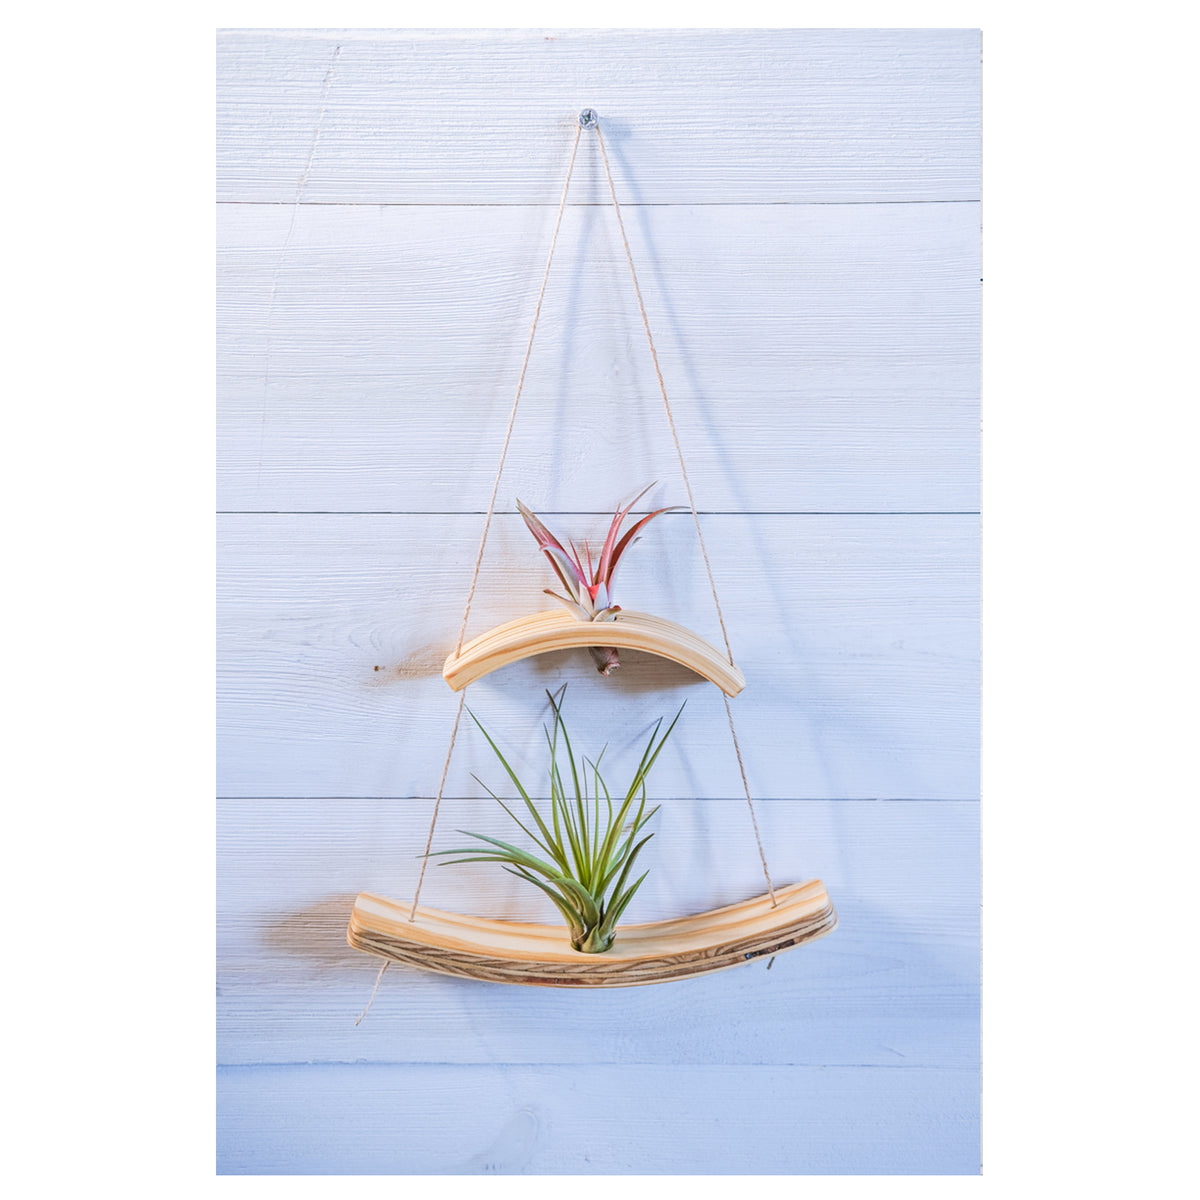 two teir bent wood air plant holder hung and tethered with jute rope